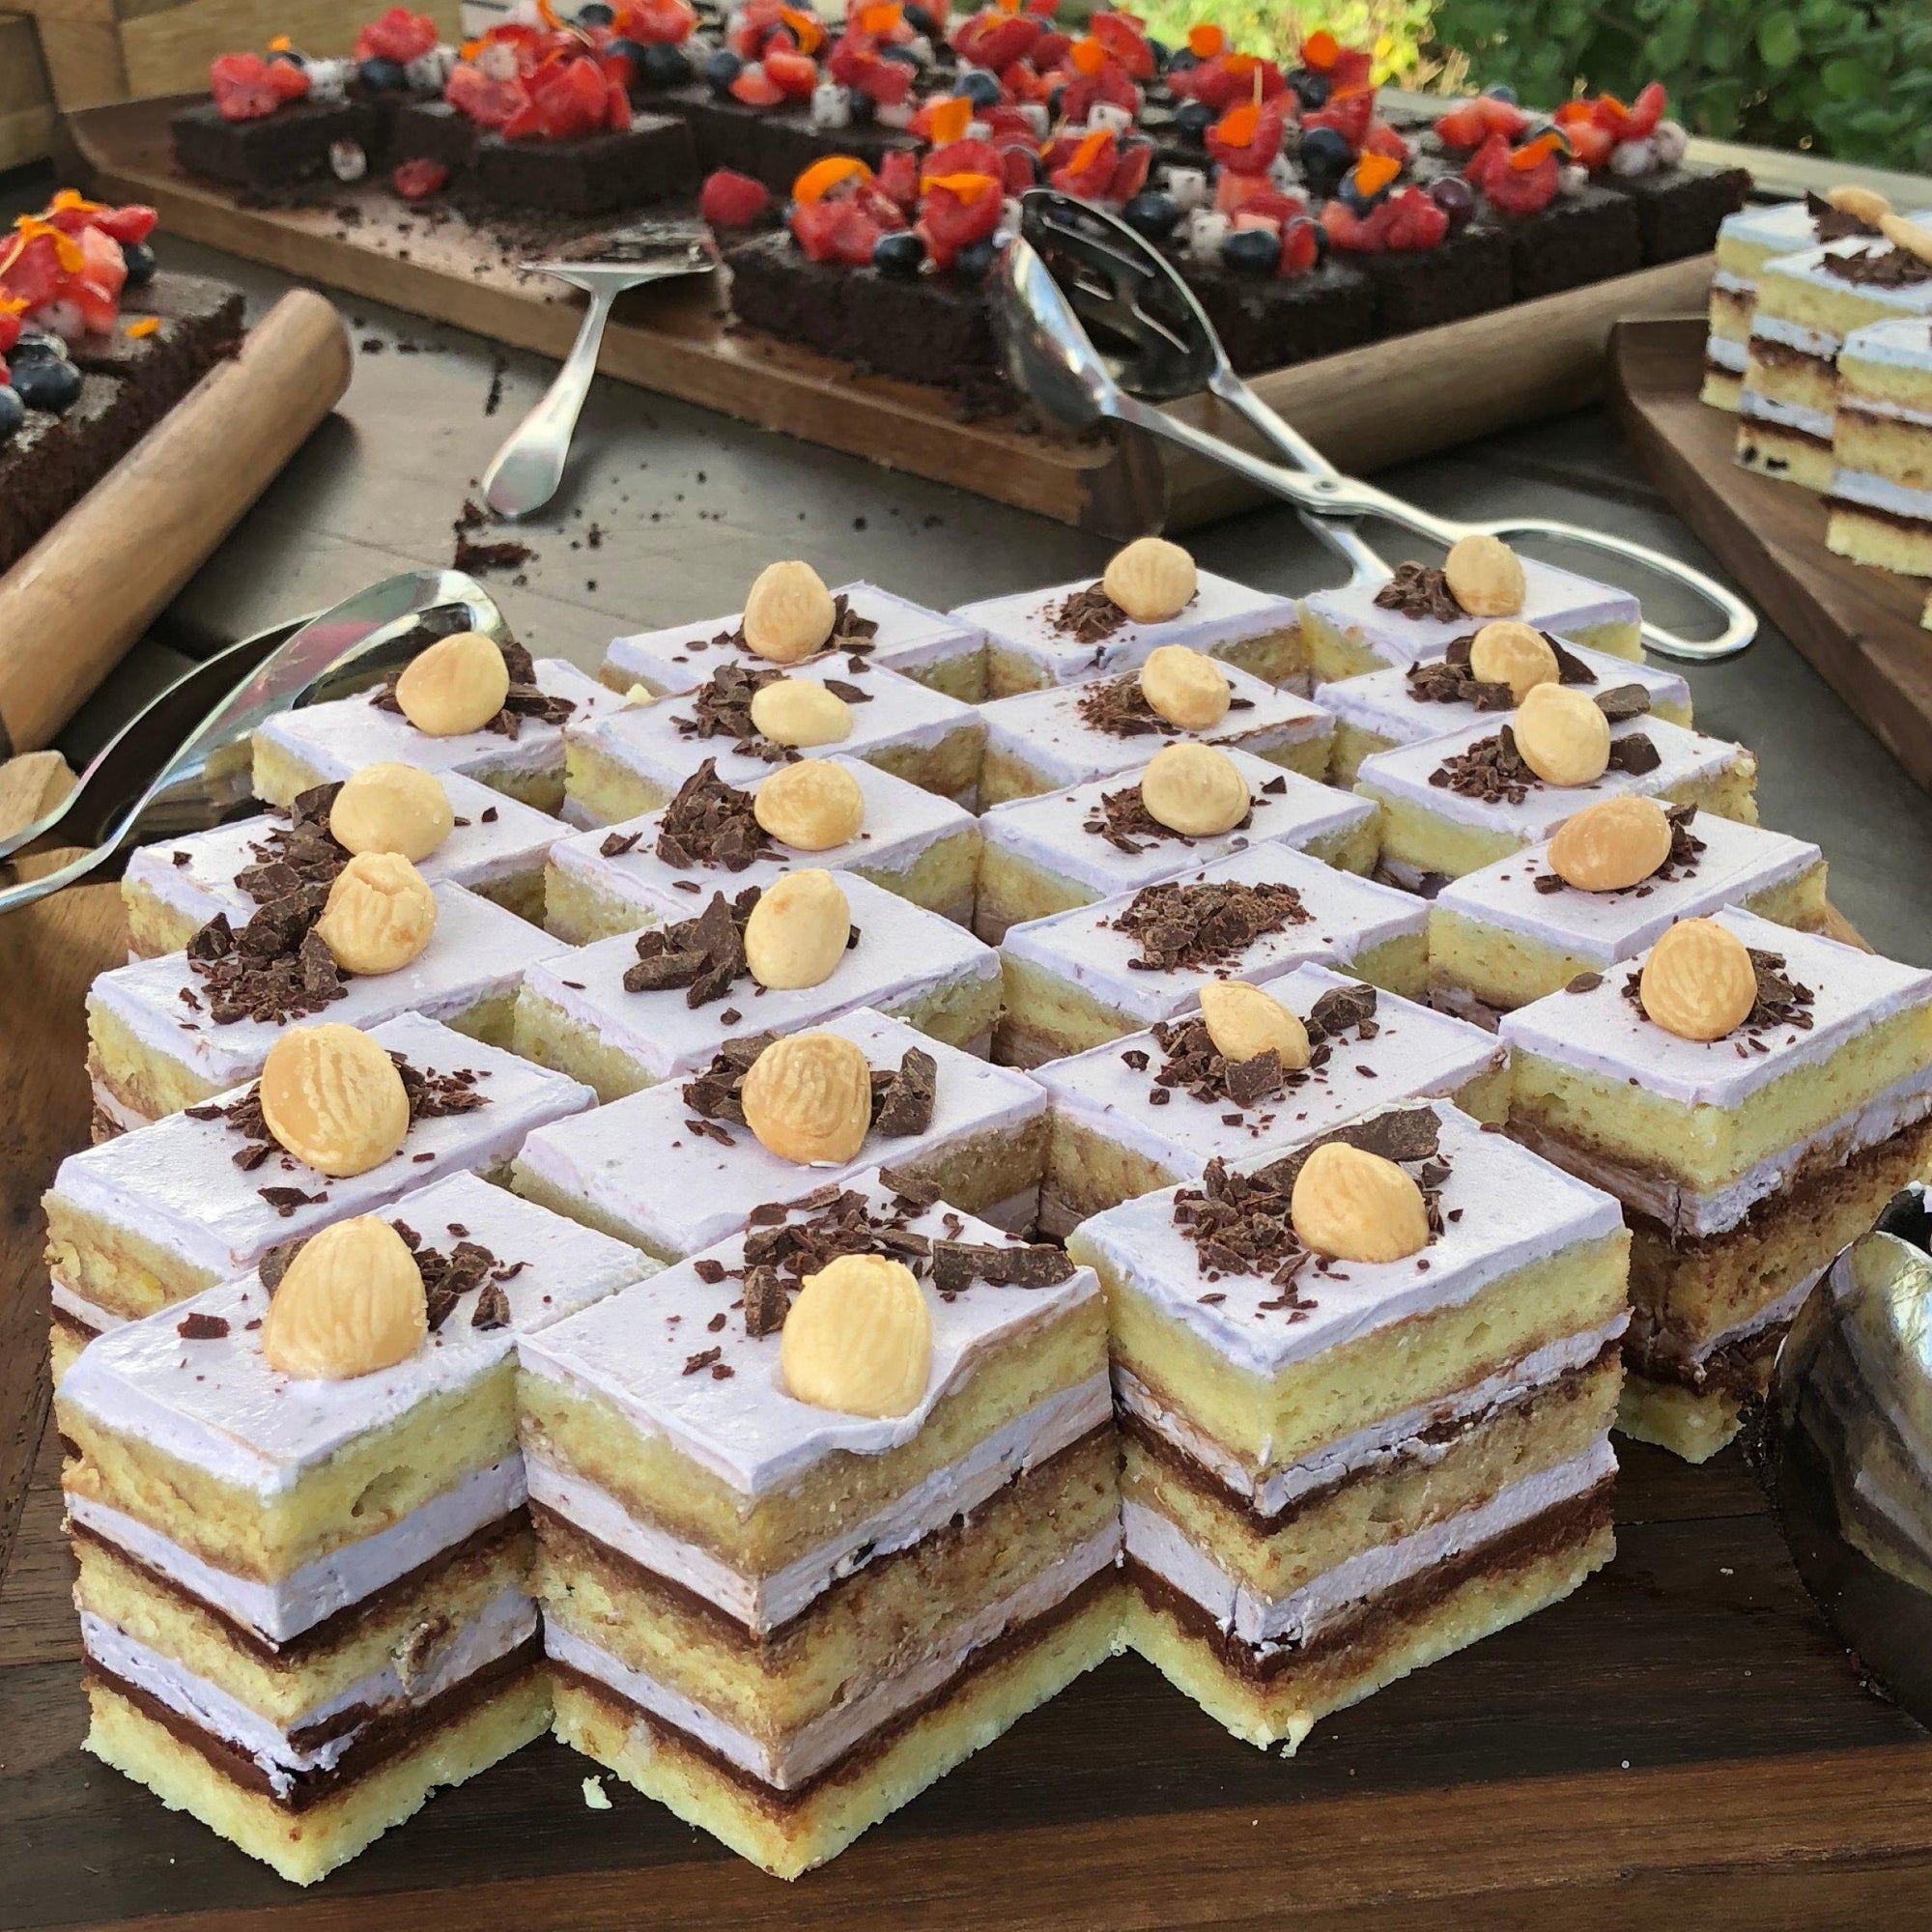 Delicious Desserts with Locally Sourced Ingredients-Maui Kuʻia Estate Chocolate